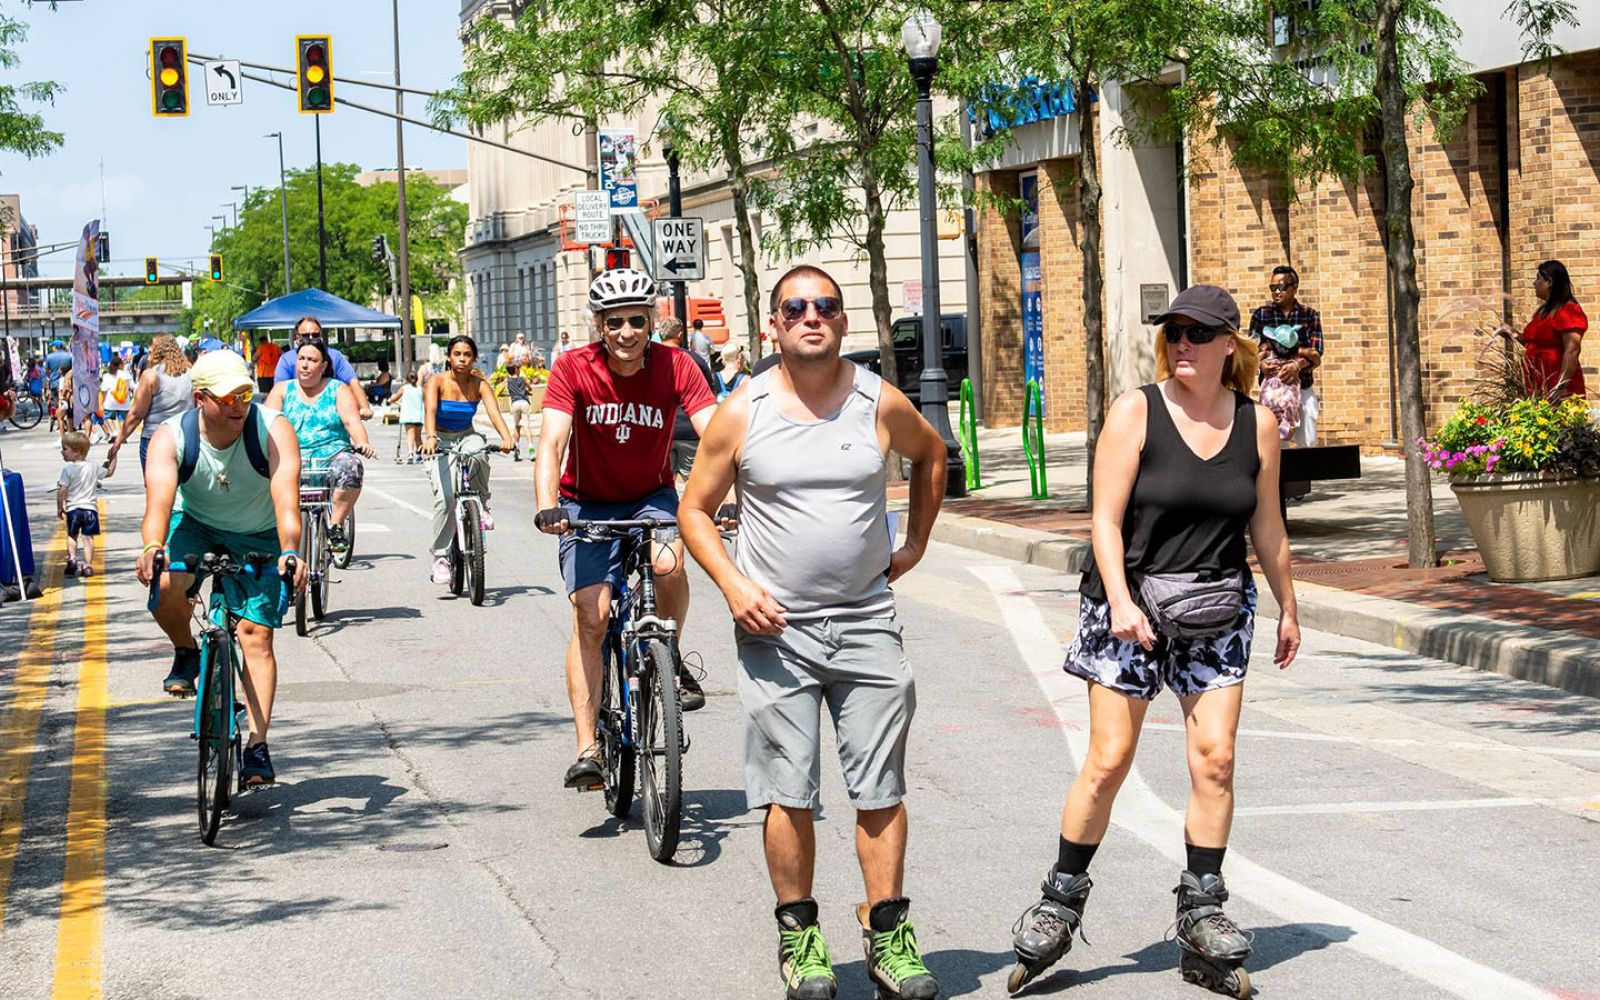 Open Streets returns downtown on Sunday, Aug. 18.